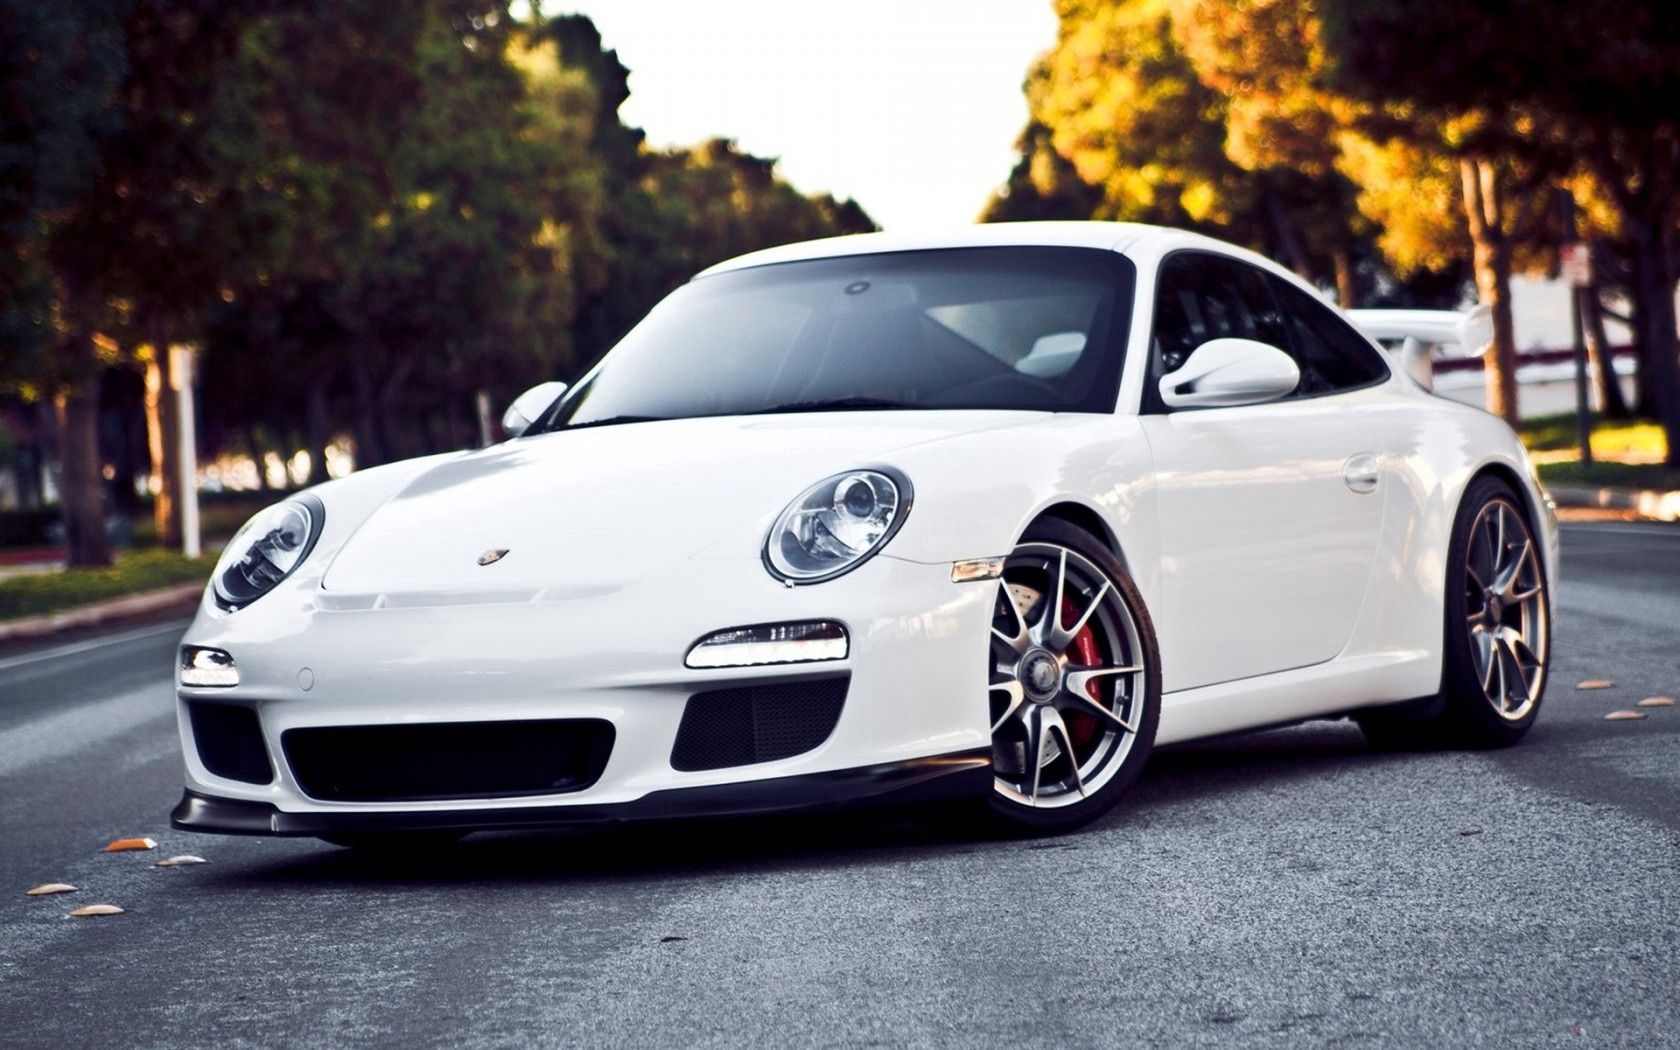 142699 free download White wallpapers for phone, cars, porsche, road White images and screensavers for mobile